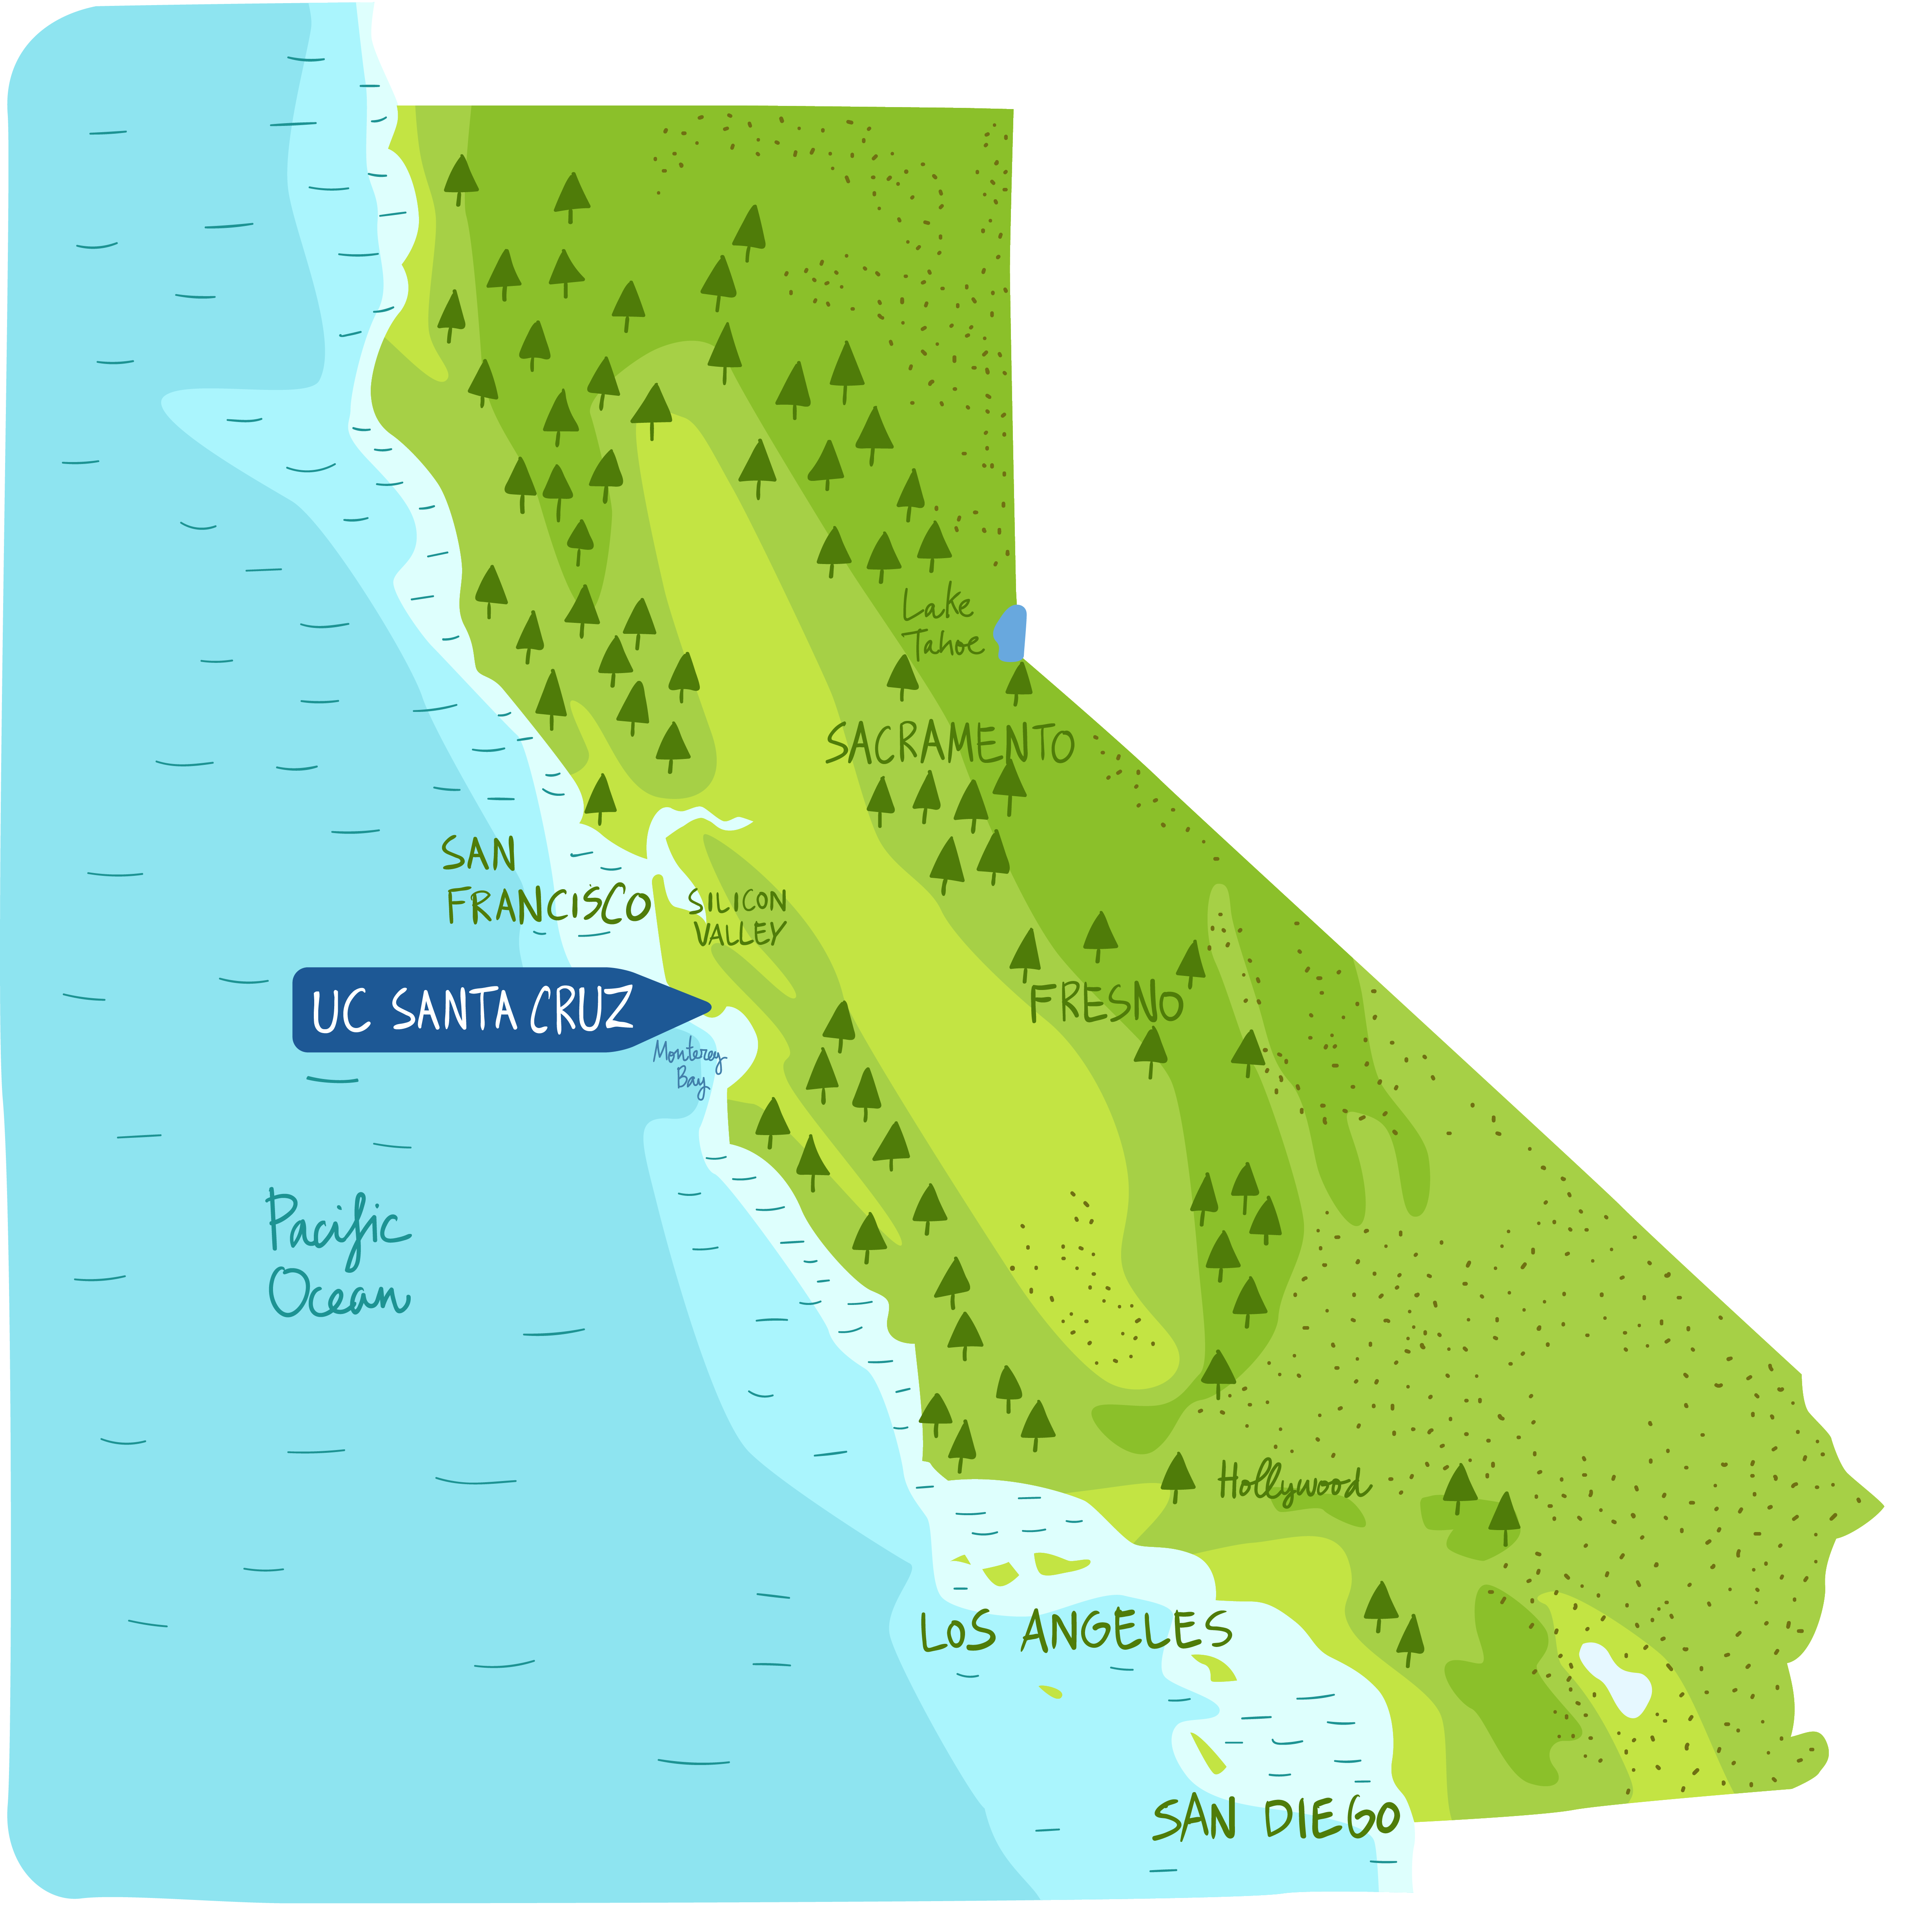 Illustration of the state of California with key cities and ֱ called out.